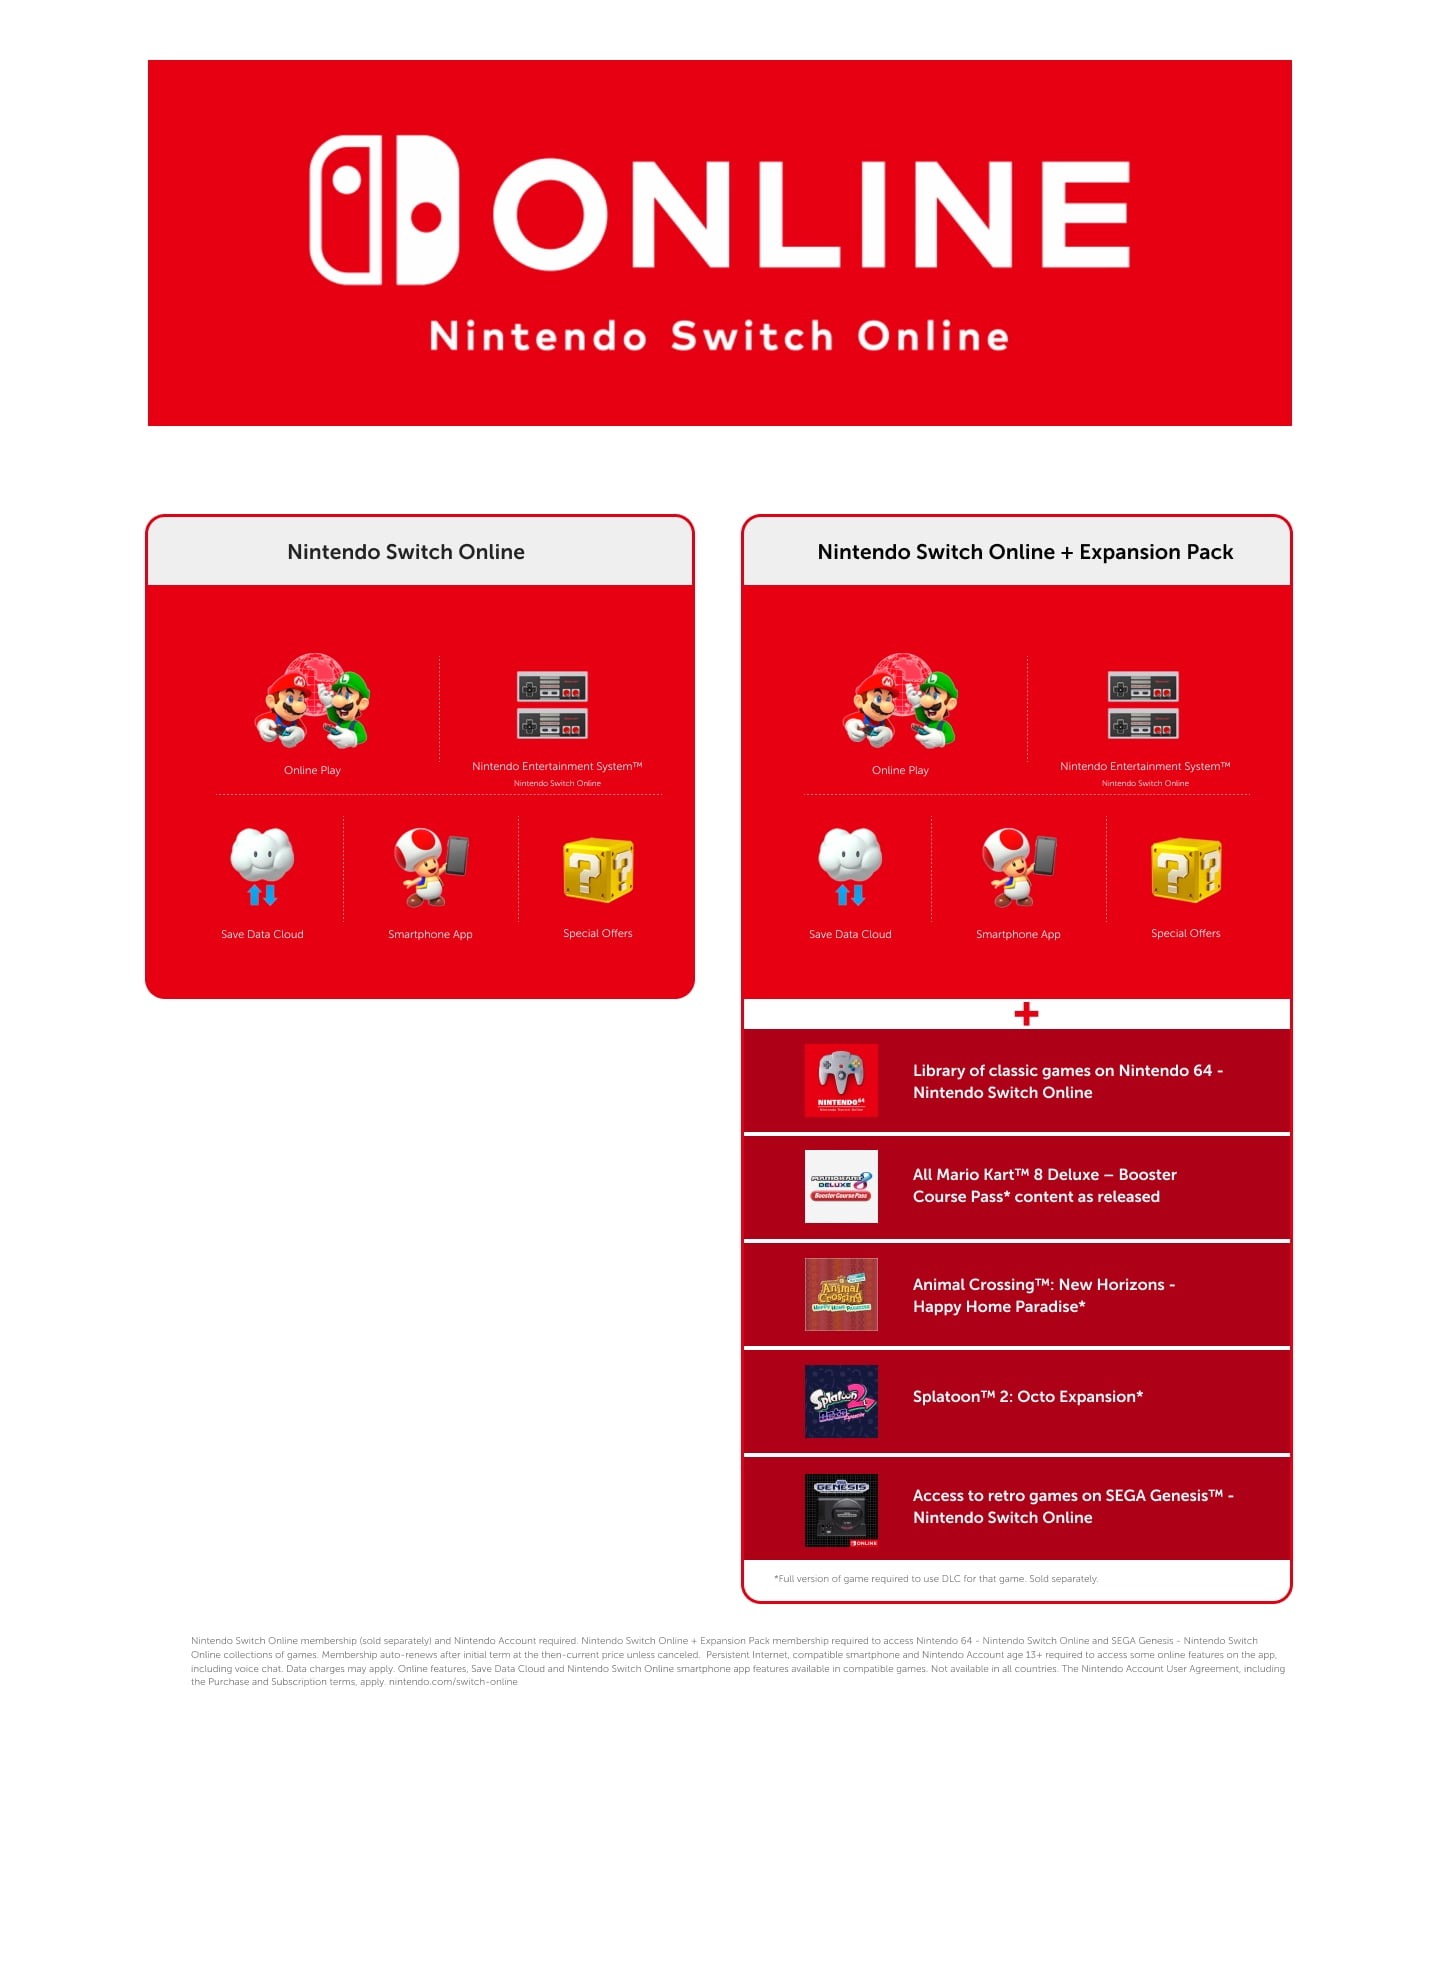 Next NEW Upgrade for Nintendo Switch Online Expansion Pack